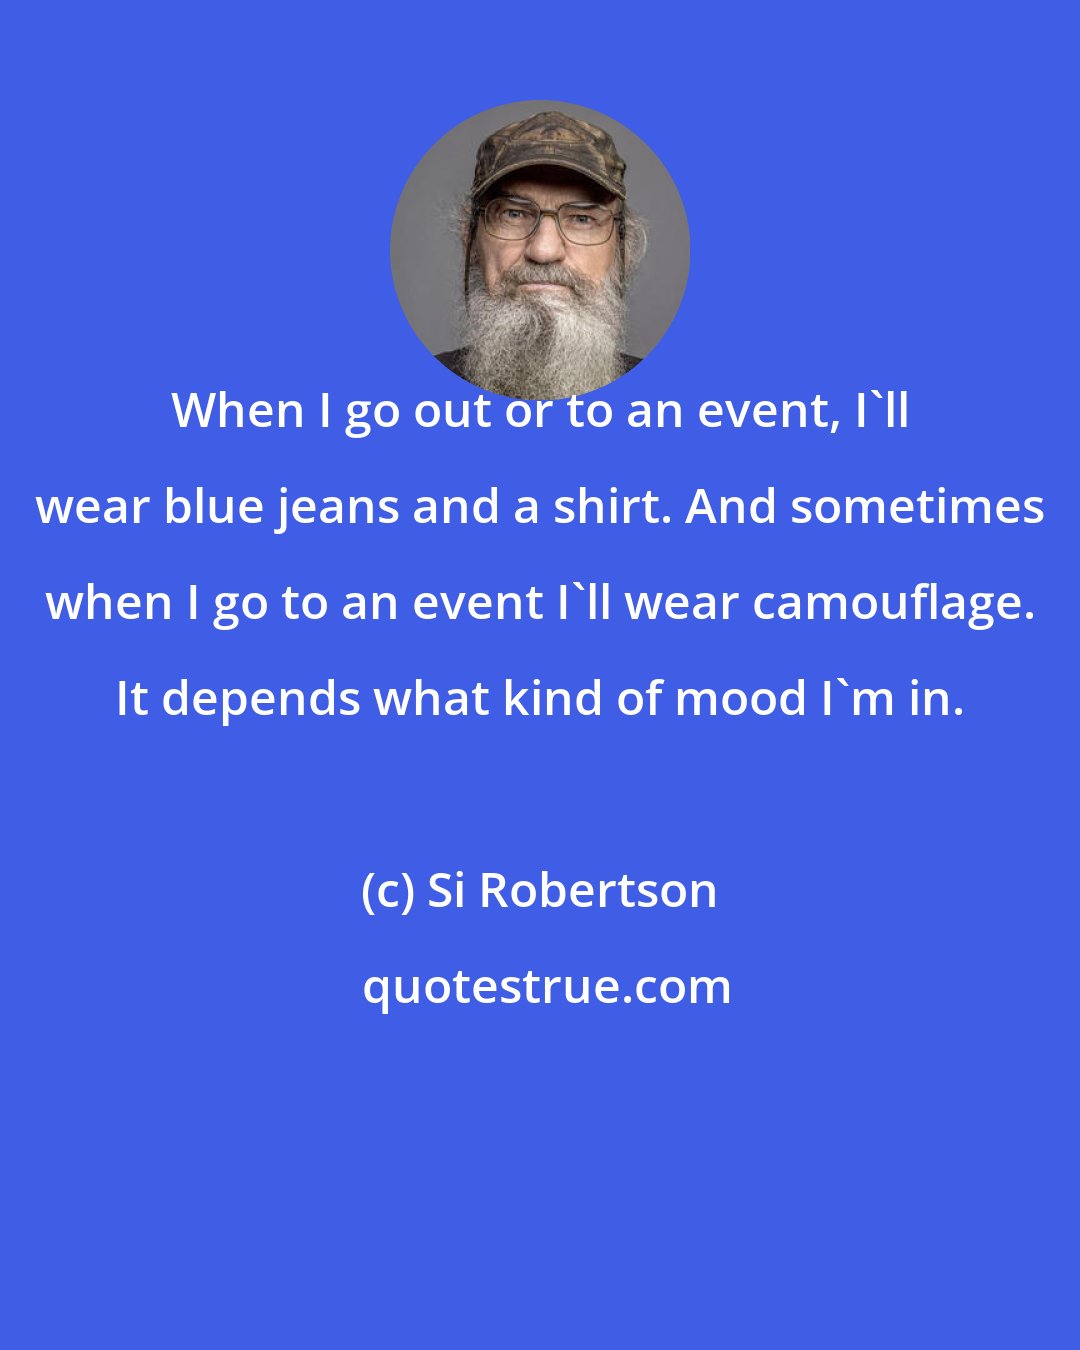 Si Robertson: When I go out or to an event, I'll wear blue jeans and a shirt. And sometimes when I go to an event I'll wear camouflage. It depends what kind of mood I'm in.